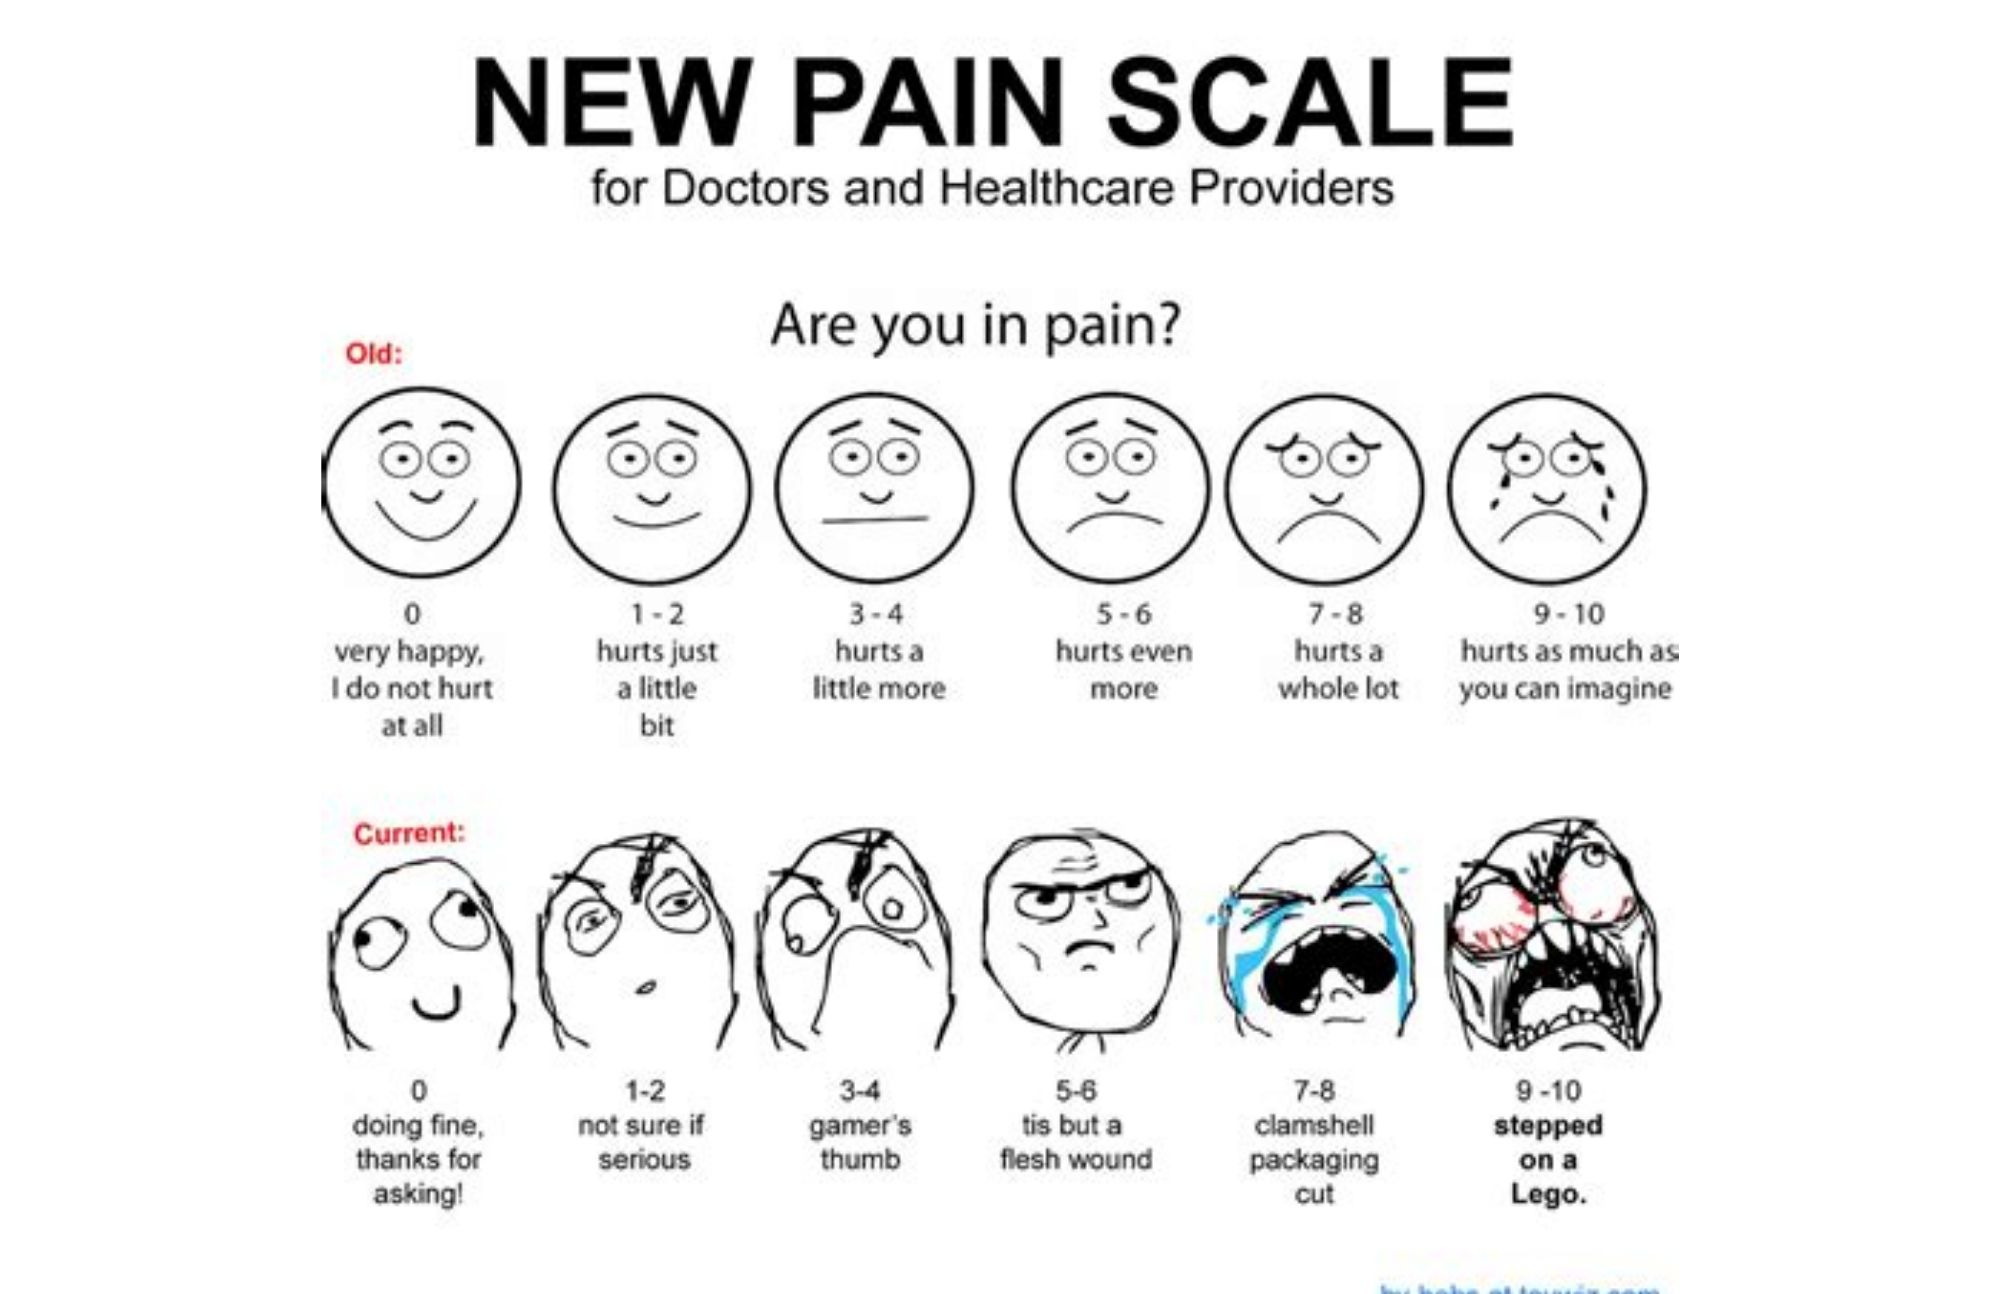 A comparison of the old and new pain scales used by doctors and healthcare providers